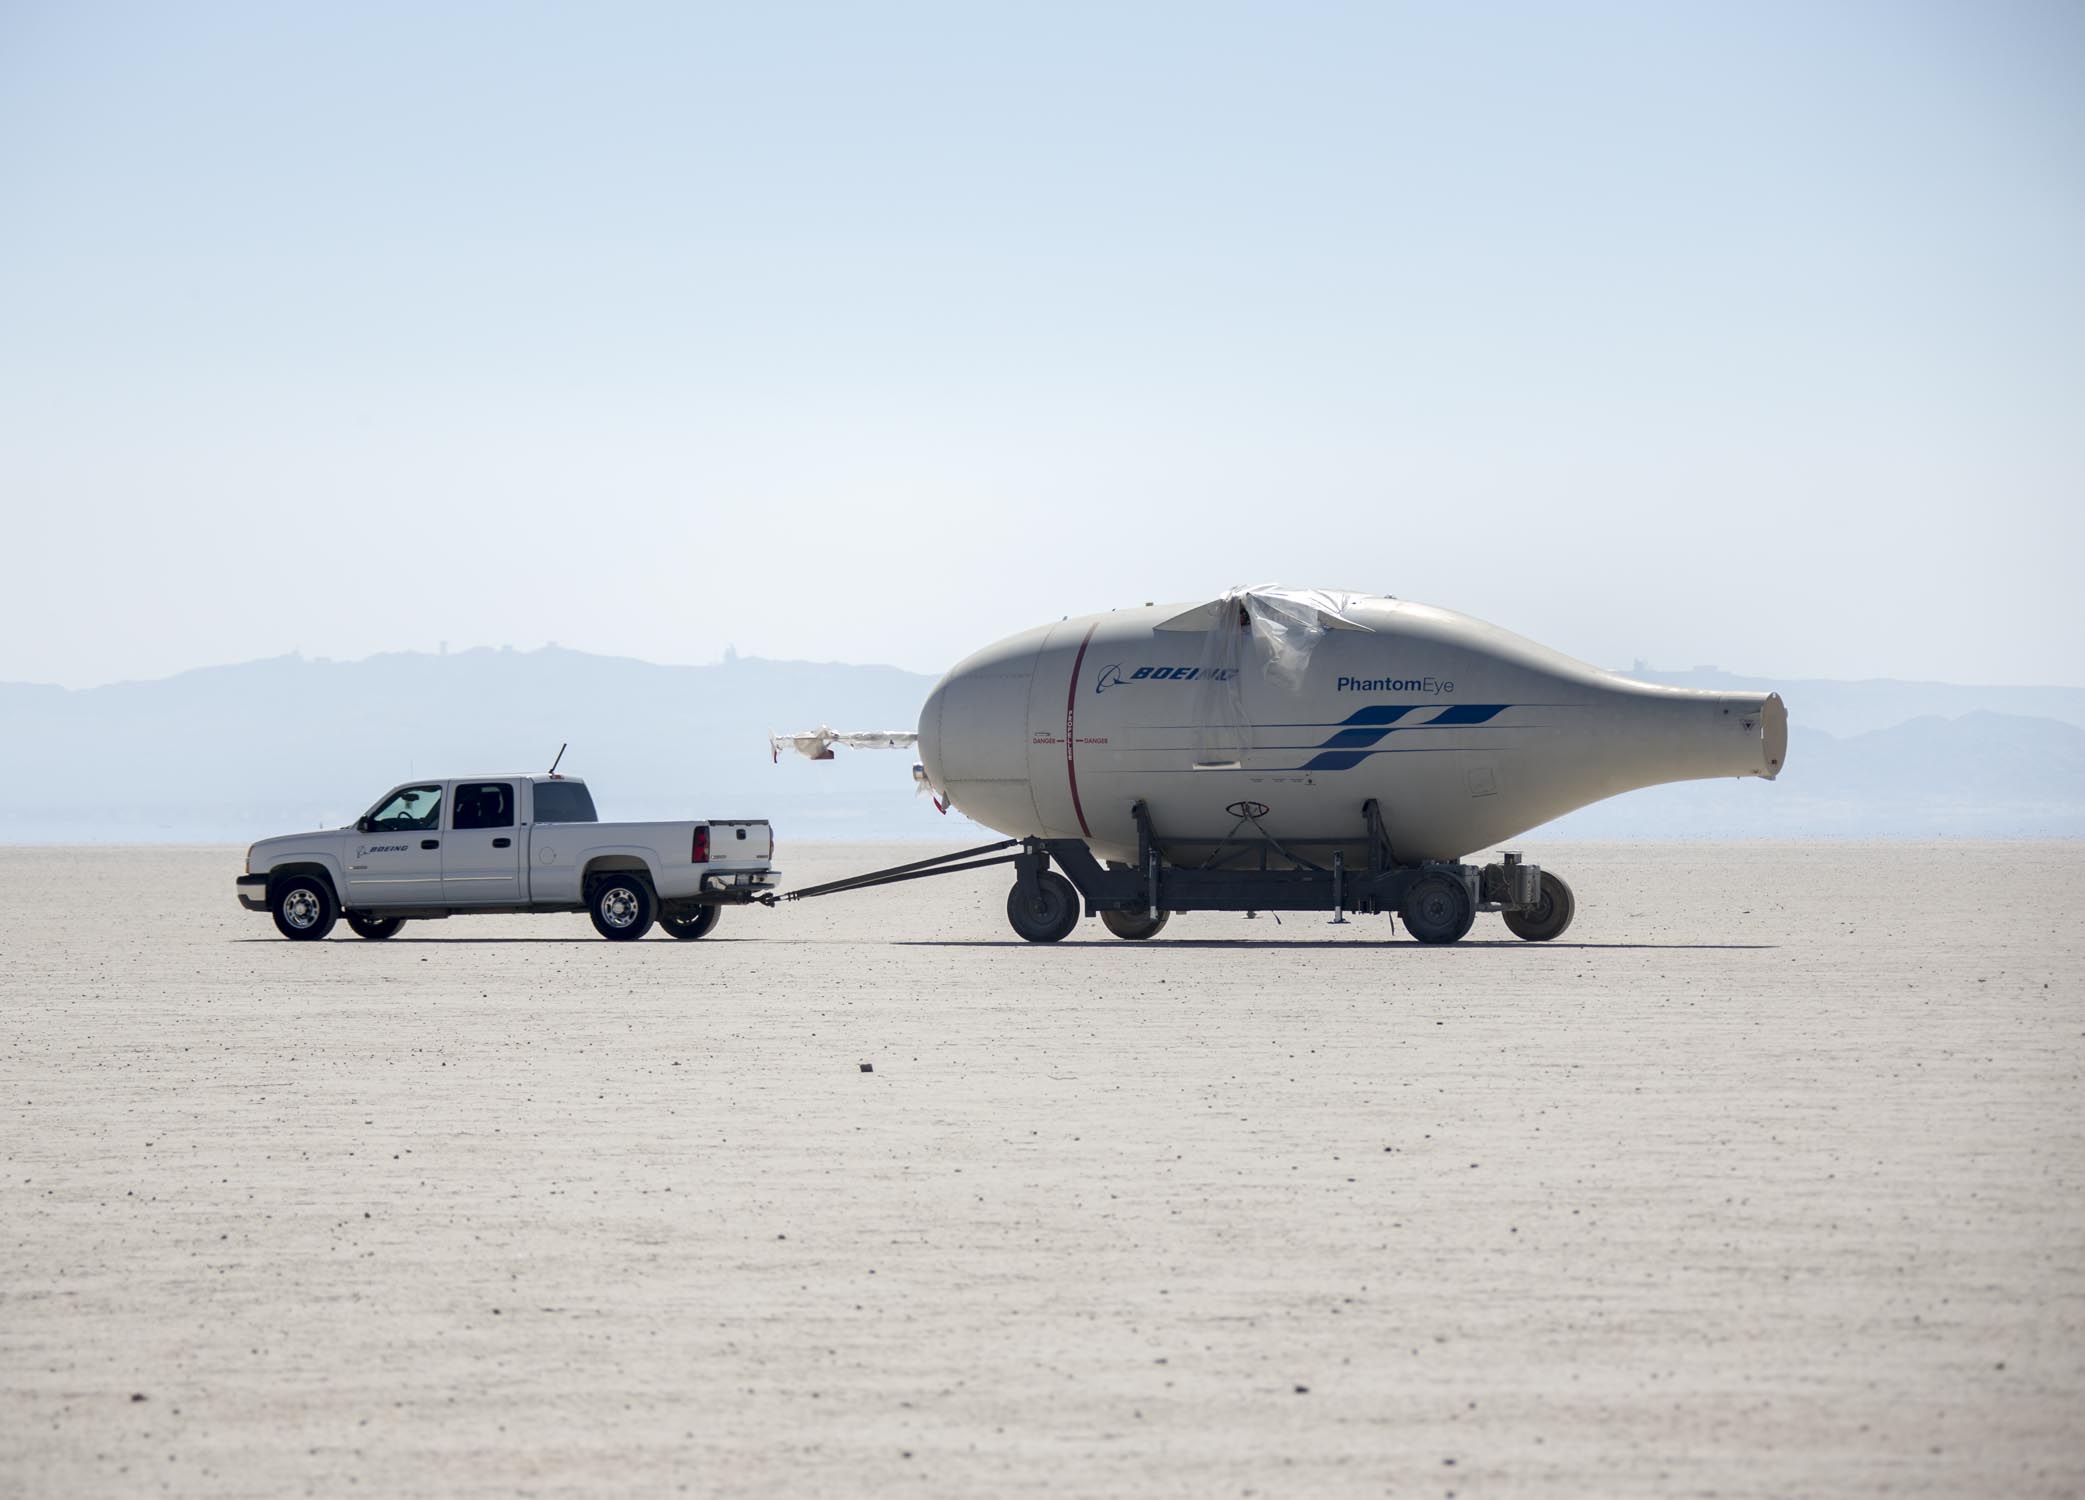 EDWARDS AIR FORCE BASE, Calif. (Aug. 17, 2016) Photos of NASA employees moving the disassembled Phantom Eye, a Boeing-developed, liquid hydrogen-powered demonstrator aircraft, during a transfer from the NASA Armstrong Flight Research Center across Rogers Dry Lake to the red-topped Hanger 4305 on North Base, where the aircraft will await reassembly and refurbishment for eventual display as part of the Air Force Flight Test Museum. Phantom Eye was designed to fly long endurance missions at high altitudes as a potential surrogate for military intelligence and communications satellites. Smoke from the Blue Cut Fire can be seen in the background of some images. (U.S. Air Force photo by Christopher Okula)